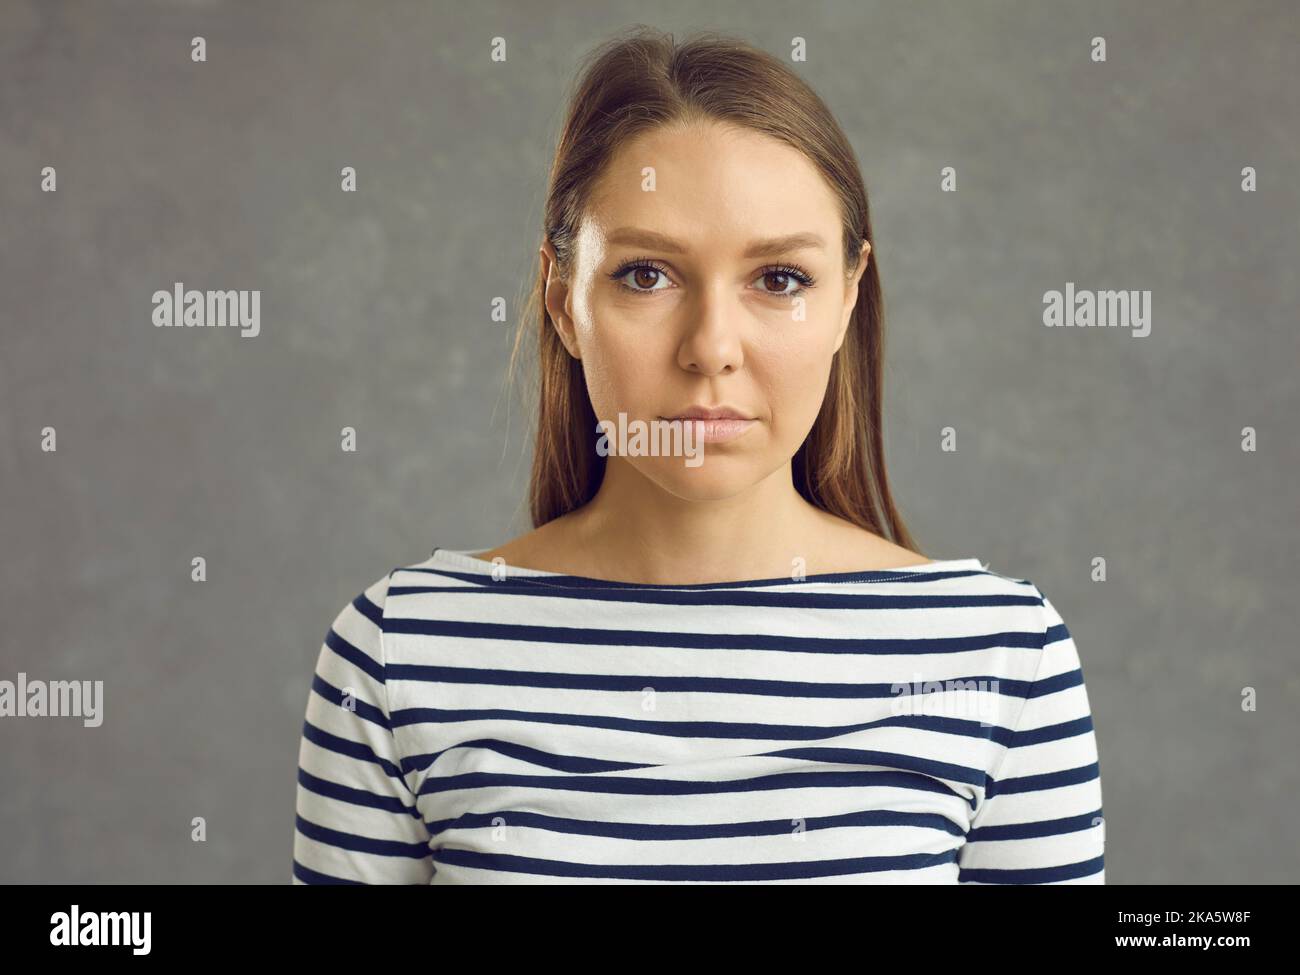 Studio portrait of young woman looking at camera with serious unemotional expression Stock Photo